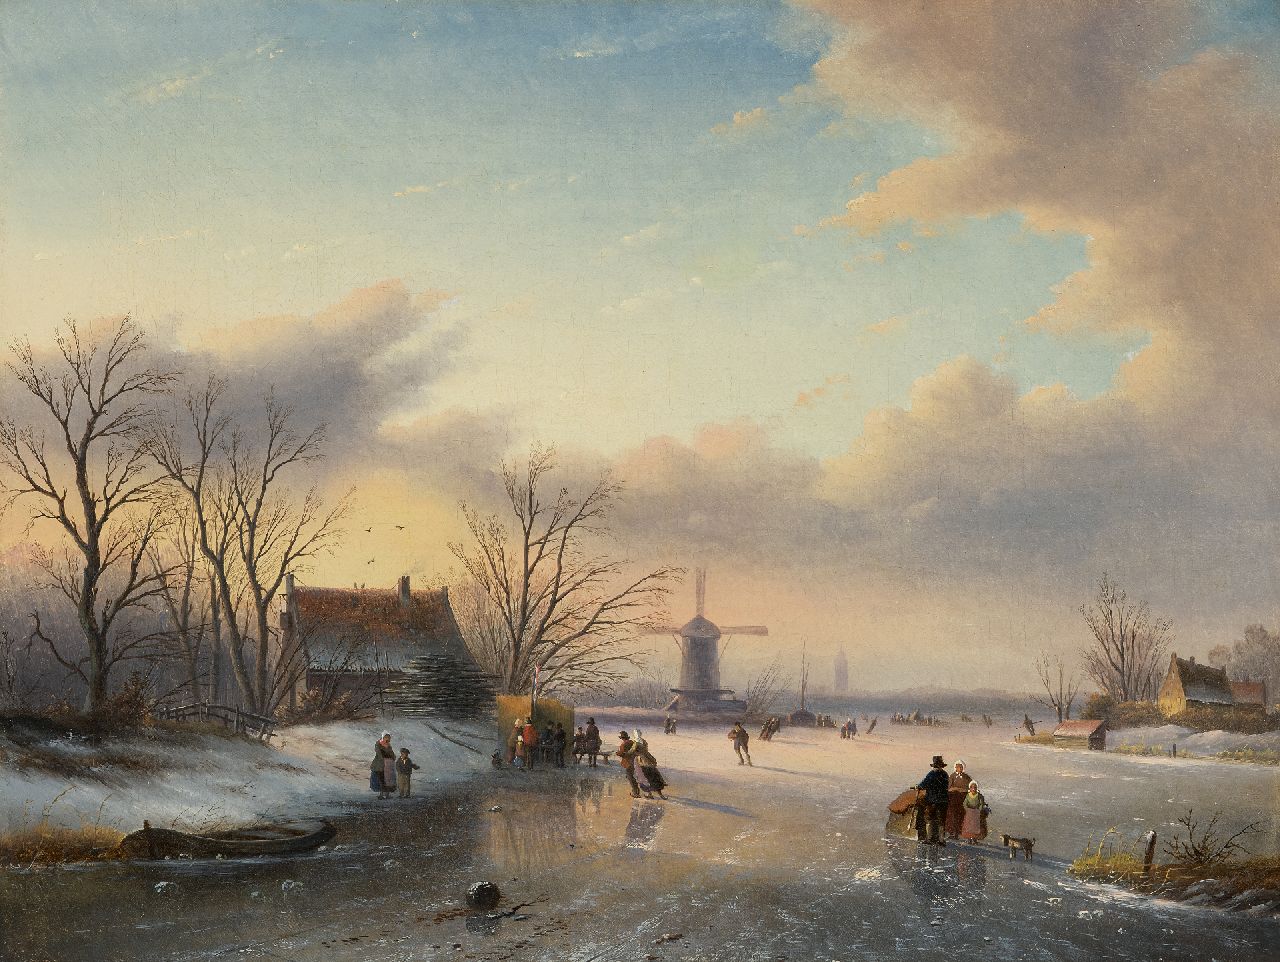 Spohler J.J.C.  | Jacob Jan Coenraad Spohler | Paintings offered for sale | Winter landscape with skaters, oil on canvas 43.5 x 57.4 cm, signed l.r. and dated '57